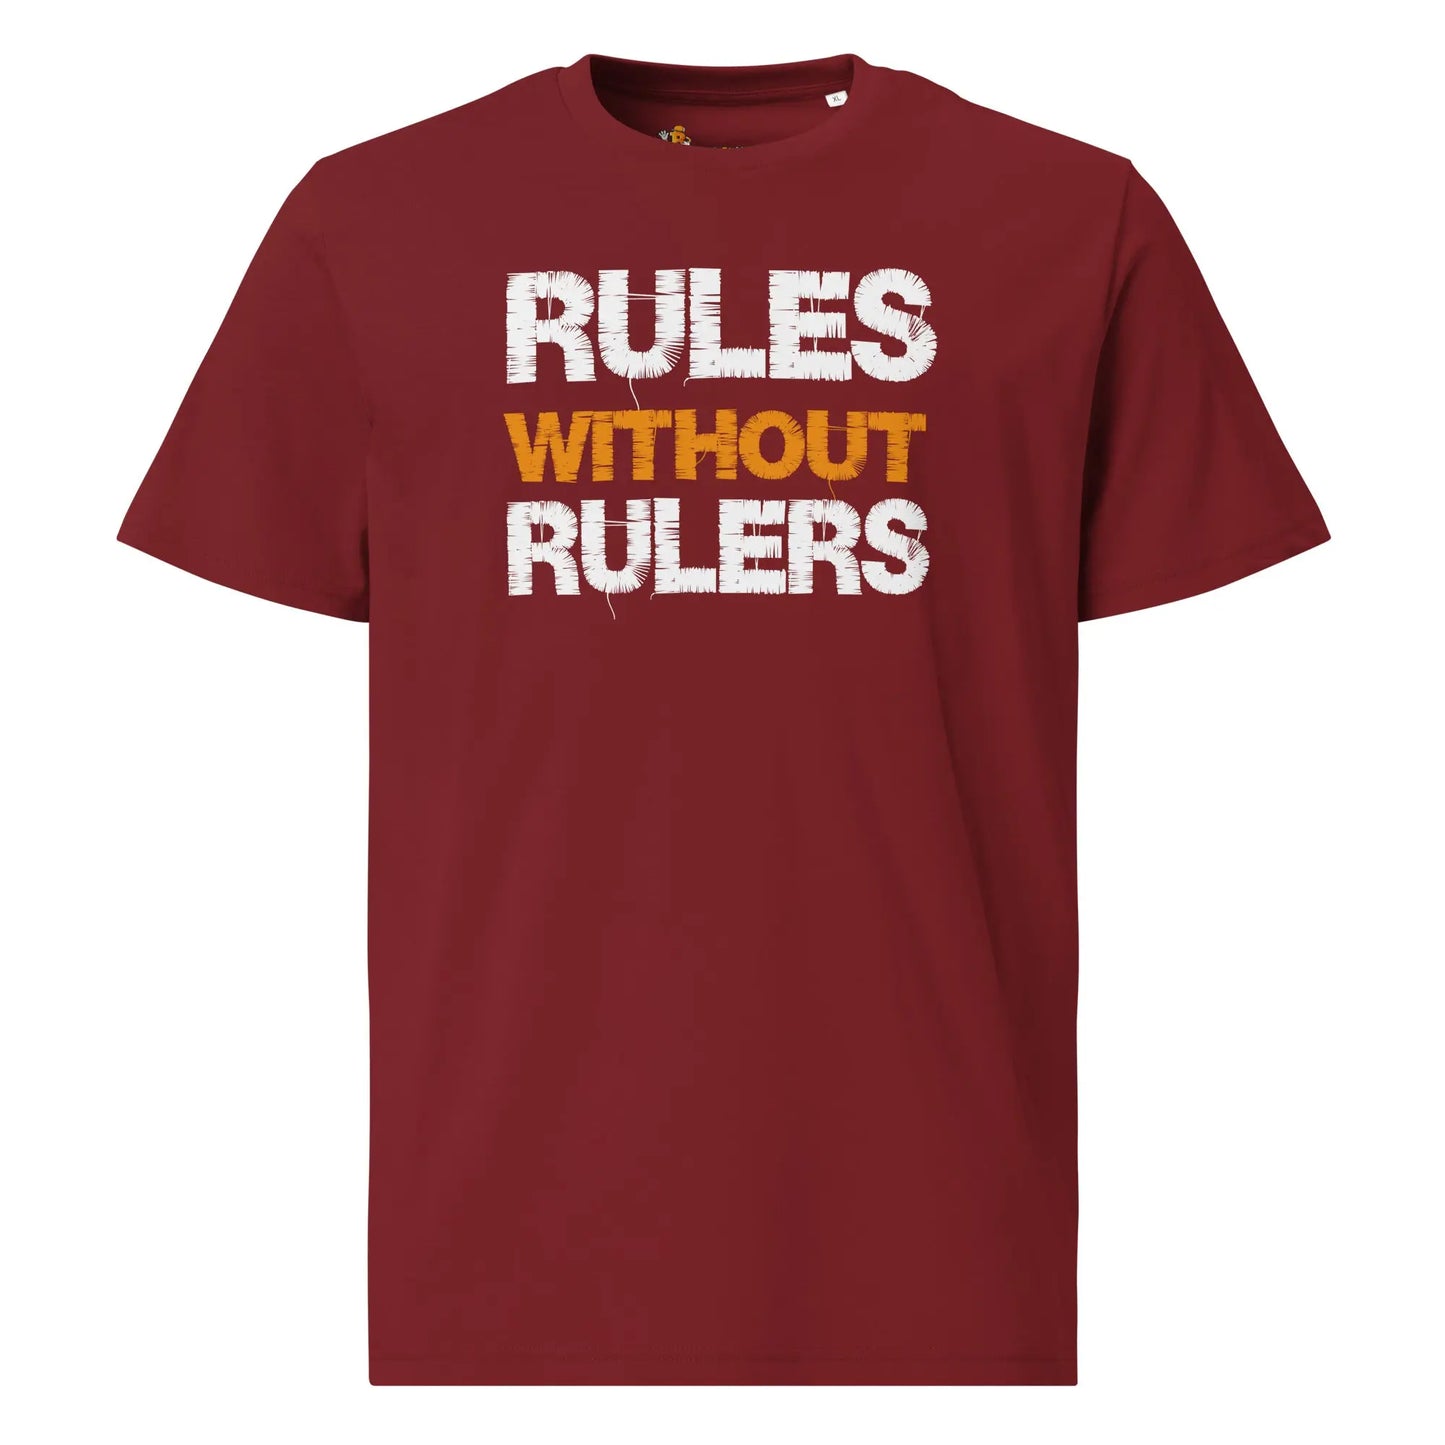 Rules Without Rulers - Premium Unisex Organic Cotton Bitcoin T-shirt Burgundy Color